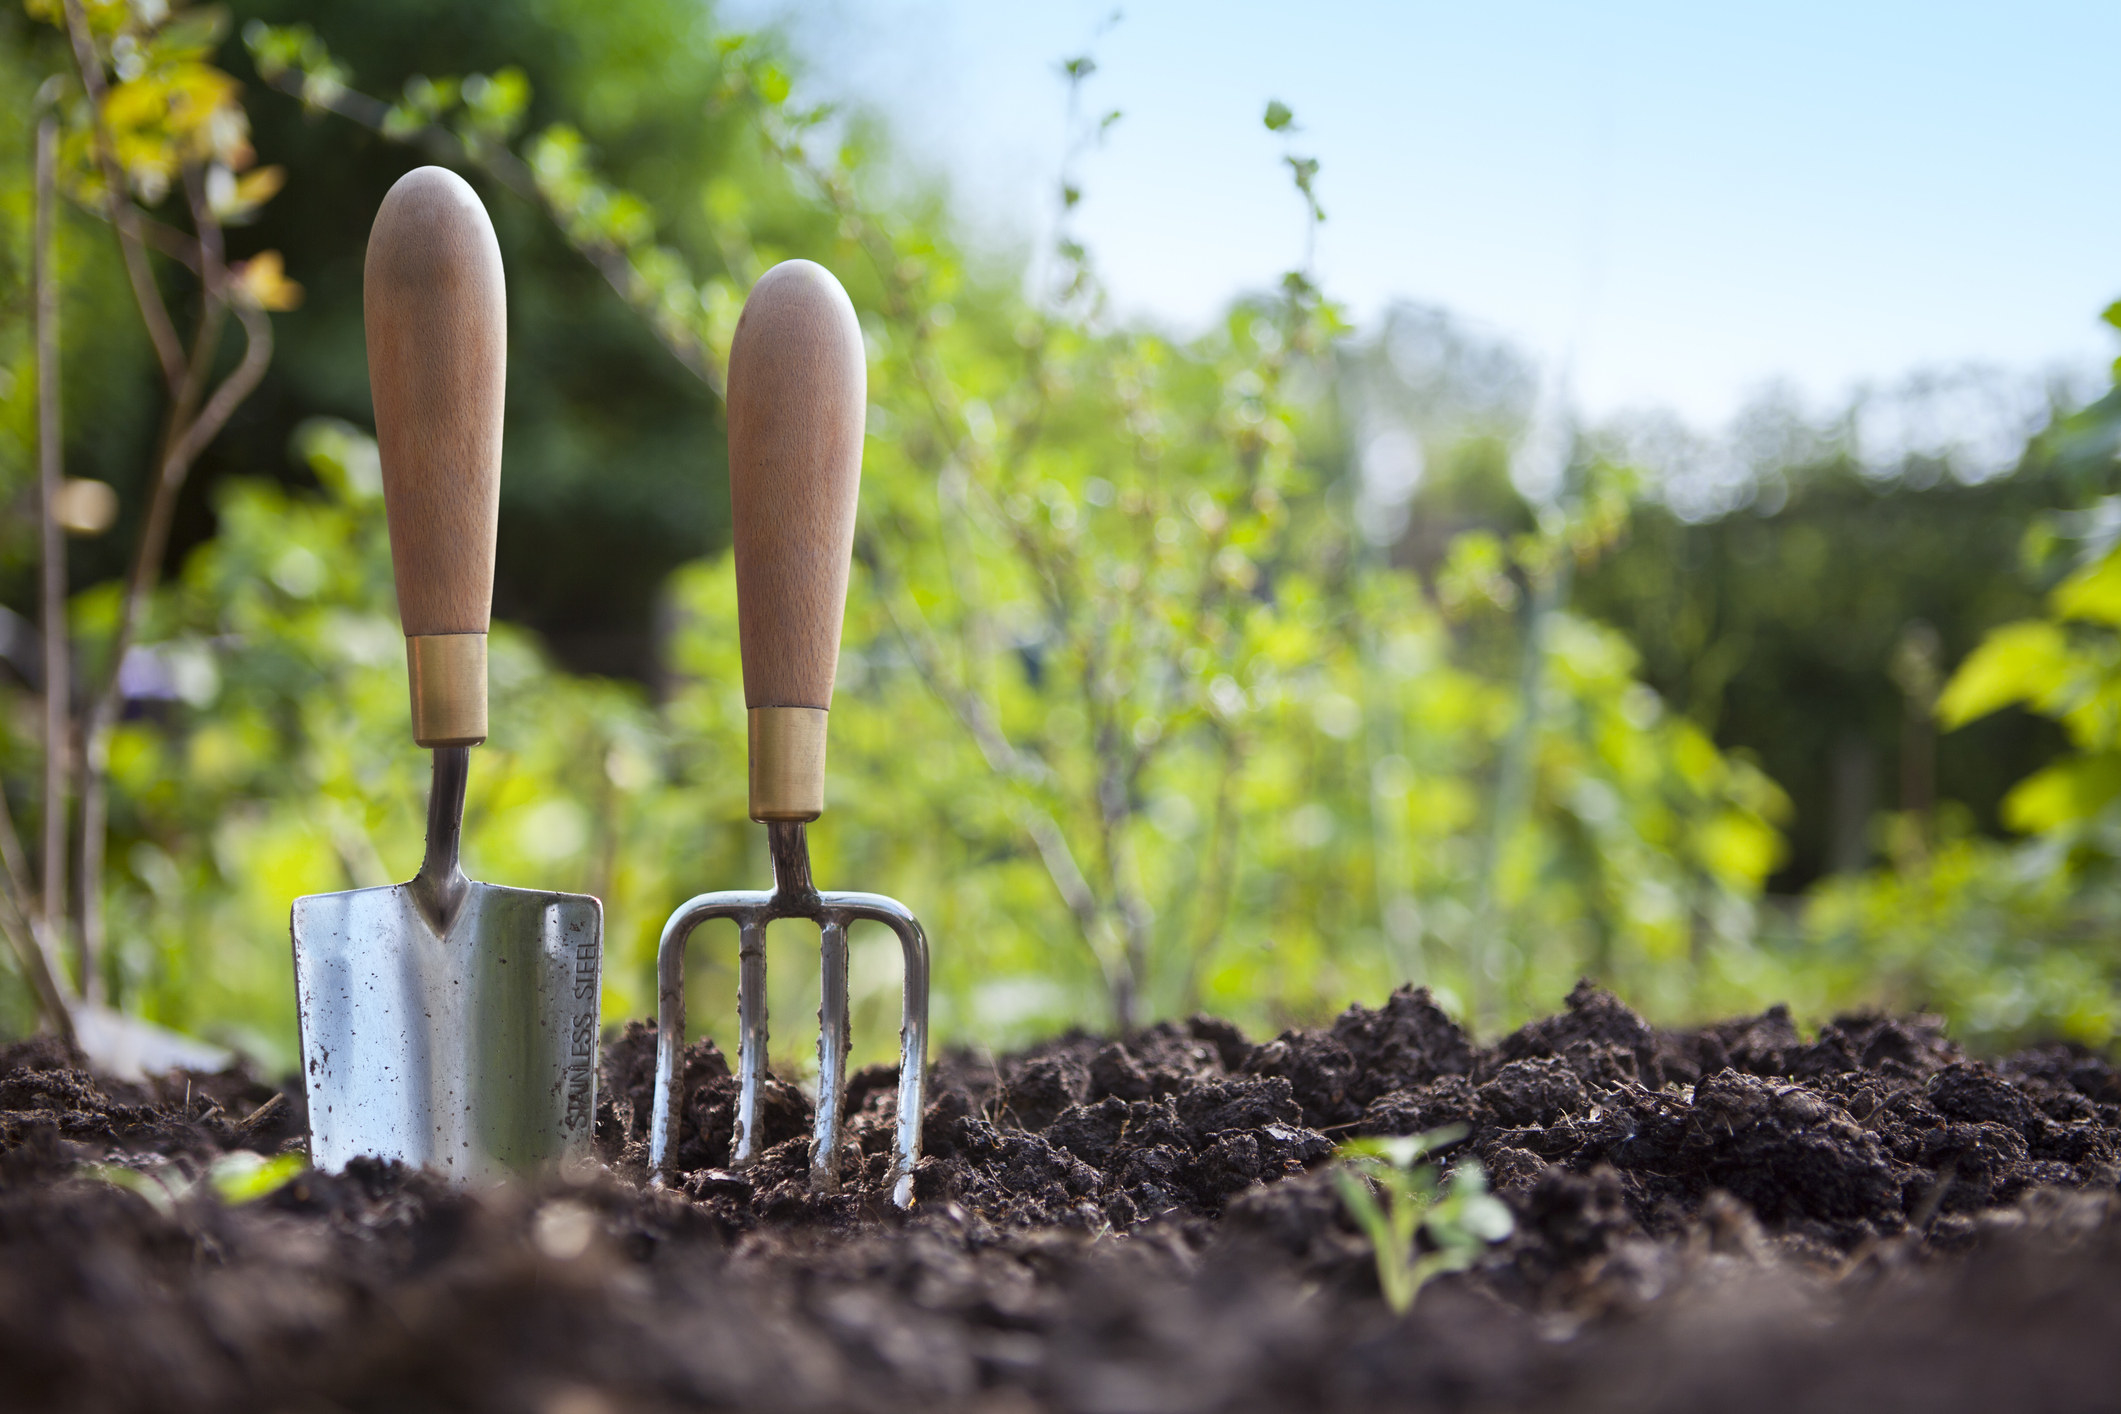 Wooden handled stainless steel garden hand trowel and hand fork tools standing in a vegetable garden border with green foliage behind and blue sky